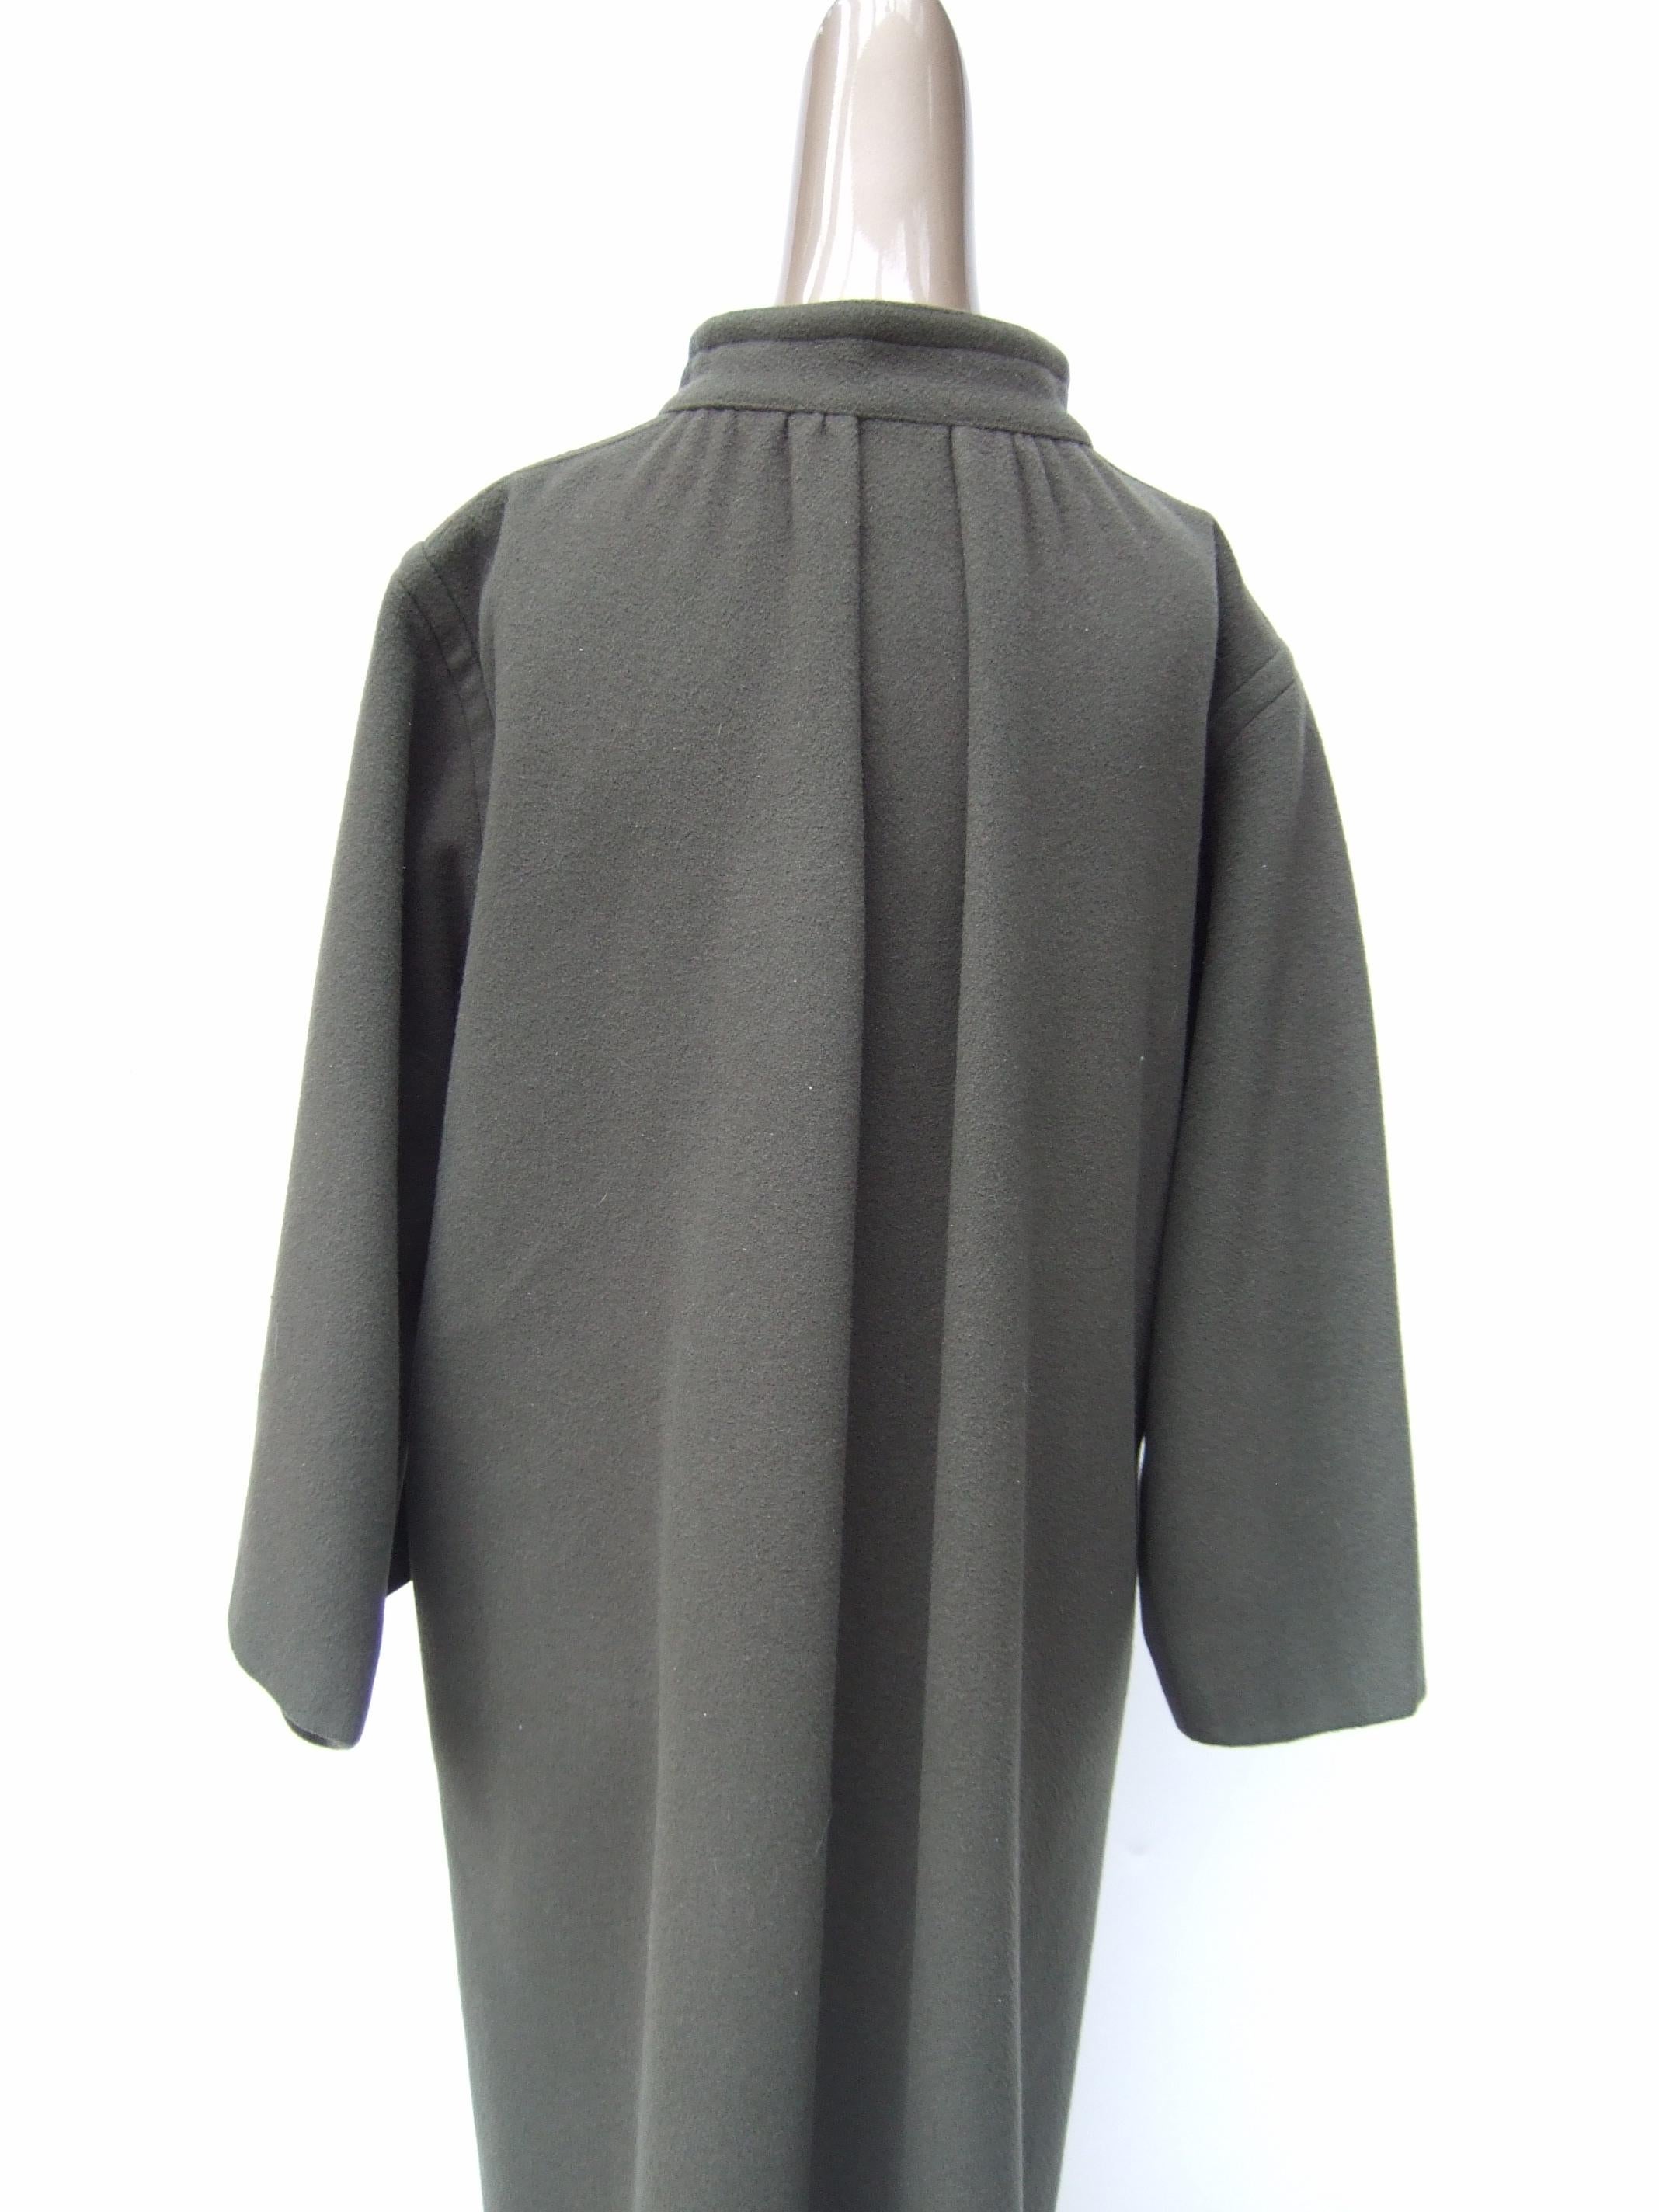 CHANEL Creations Muted Gray - Green Wool Coat with C.C. Buttons c 1980s For Sale 2